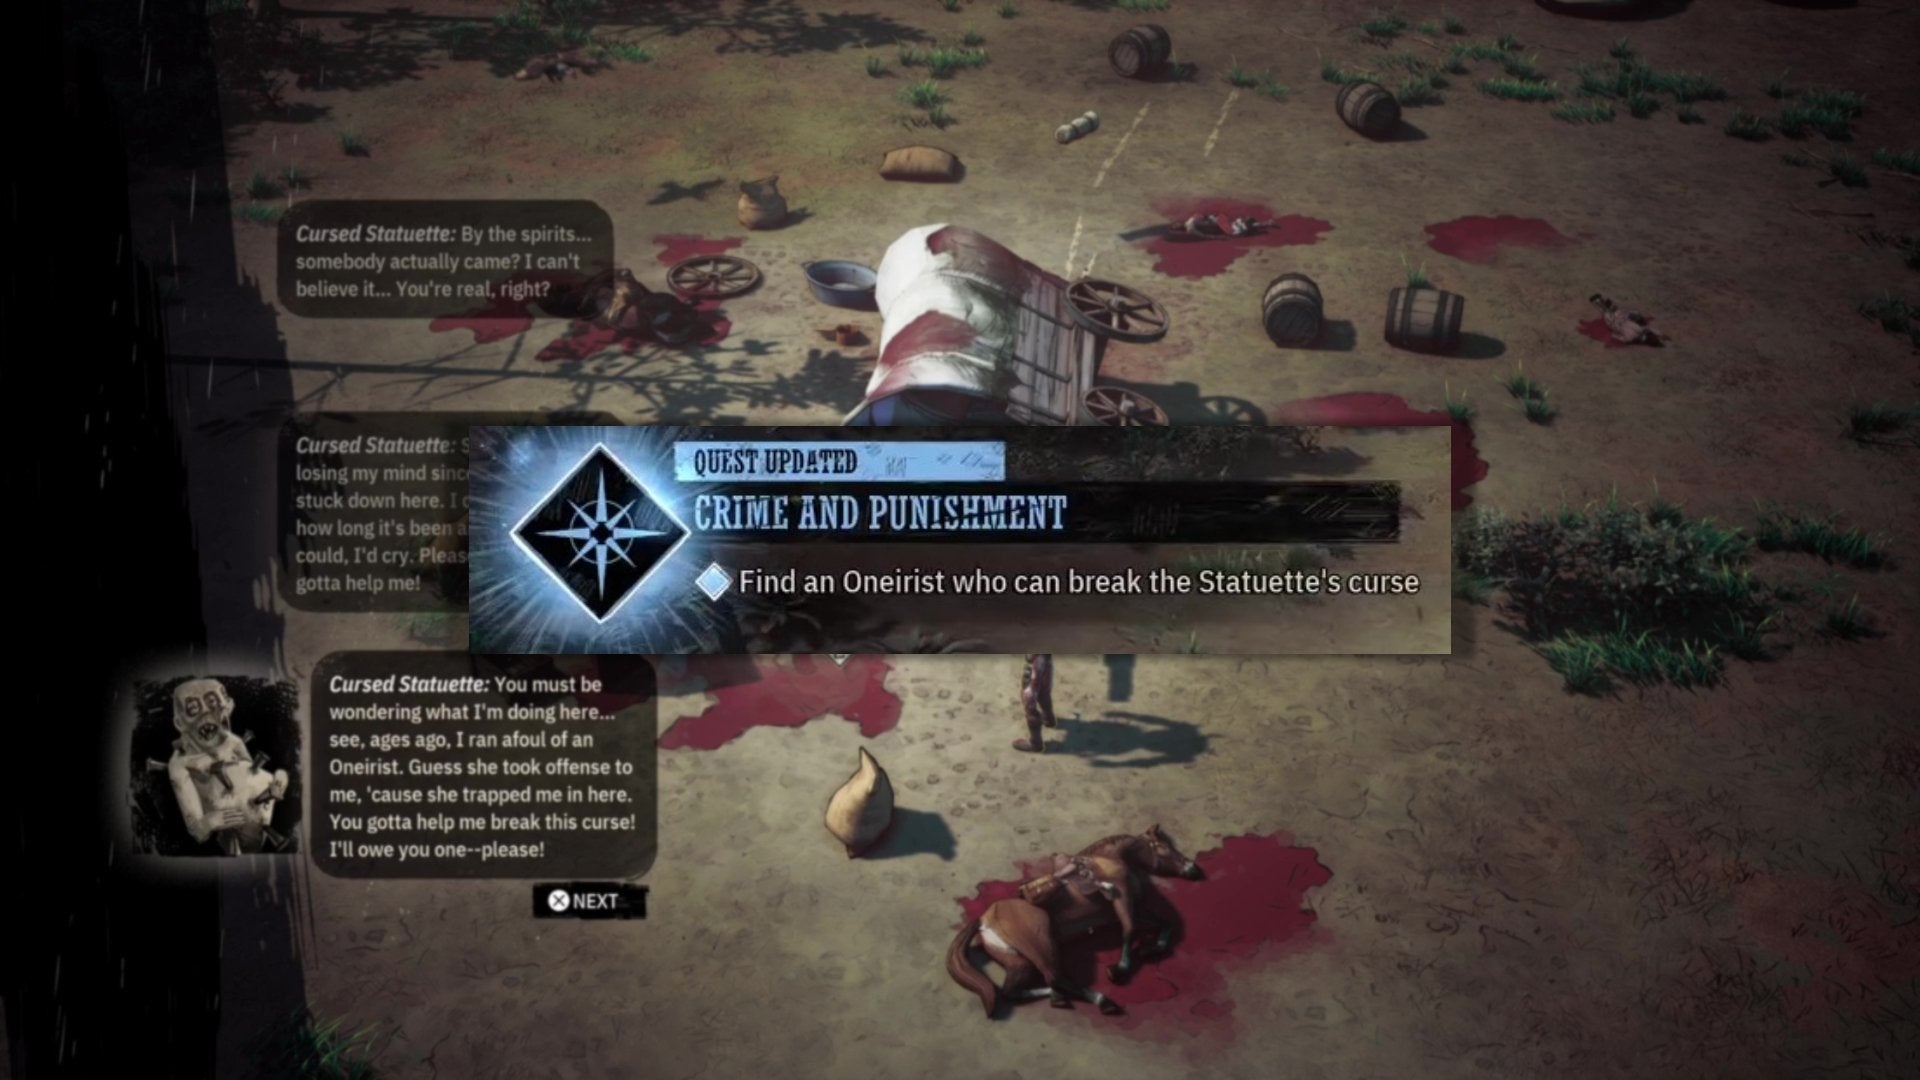 The Crime and Punishment side quest being updated with an in-game text box in Weird West.